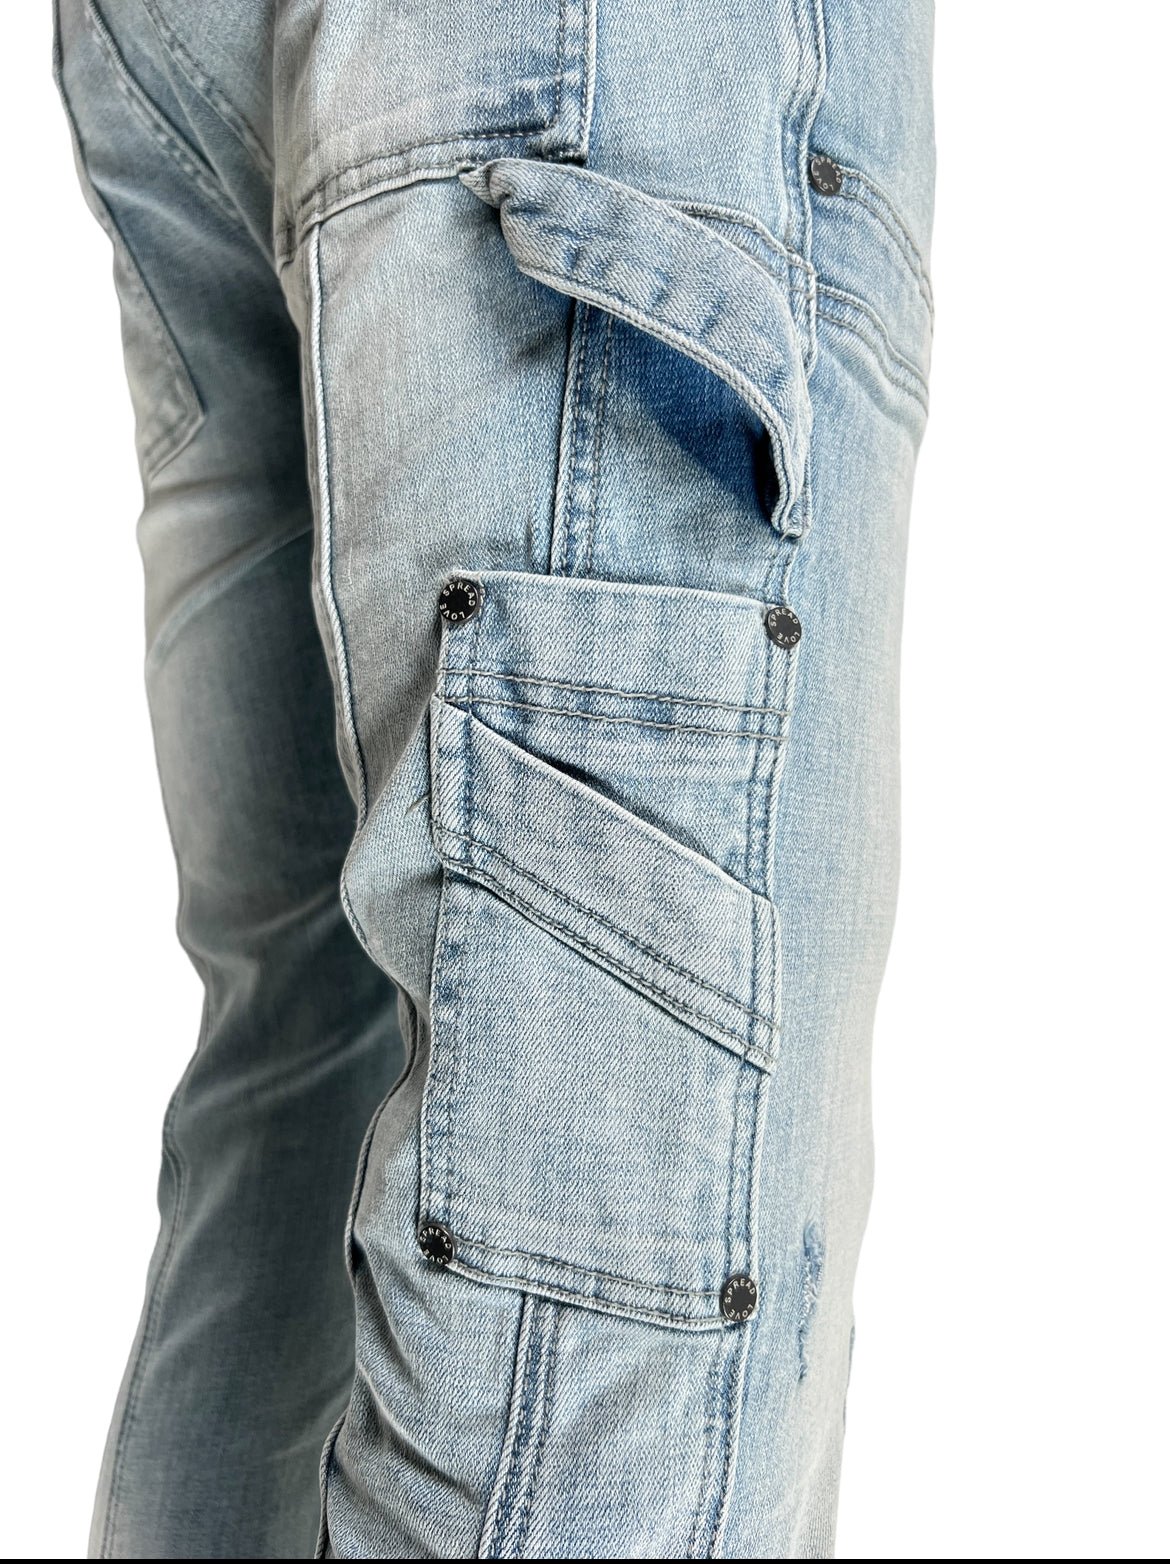 Probus SERENEDE SKY STACKED JEANS BLUE/ SERENEDE SKY STACKED JEANS BLUE/ BLUE